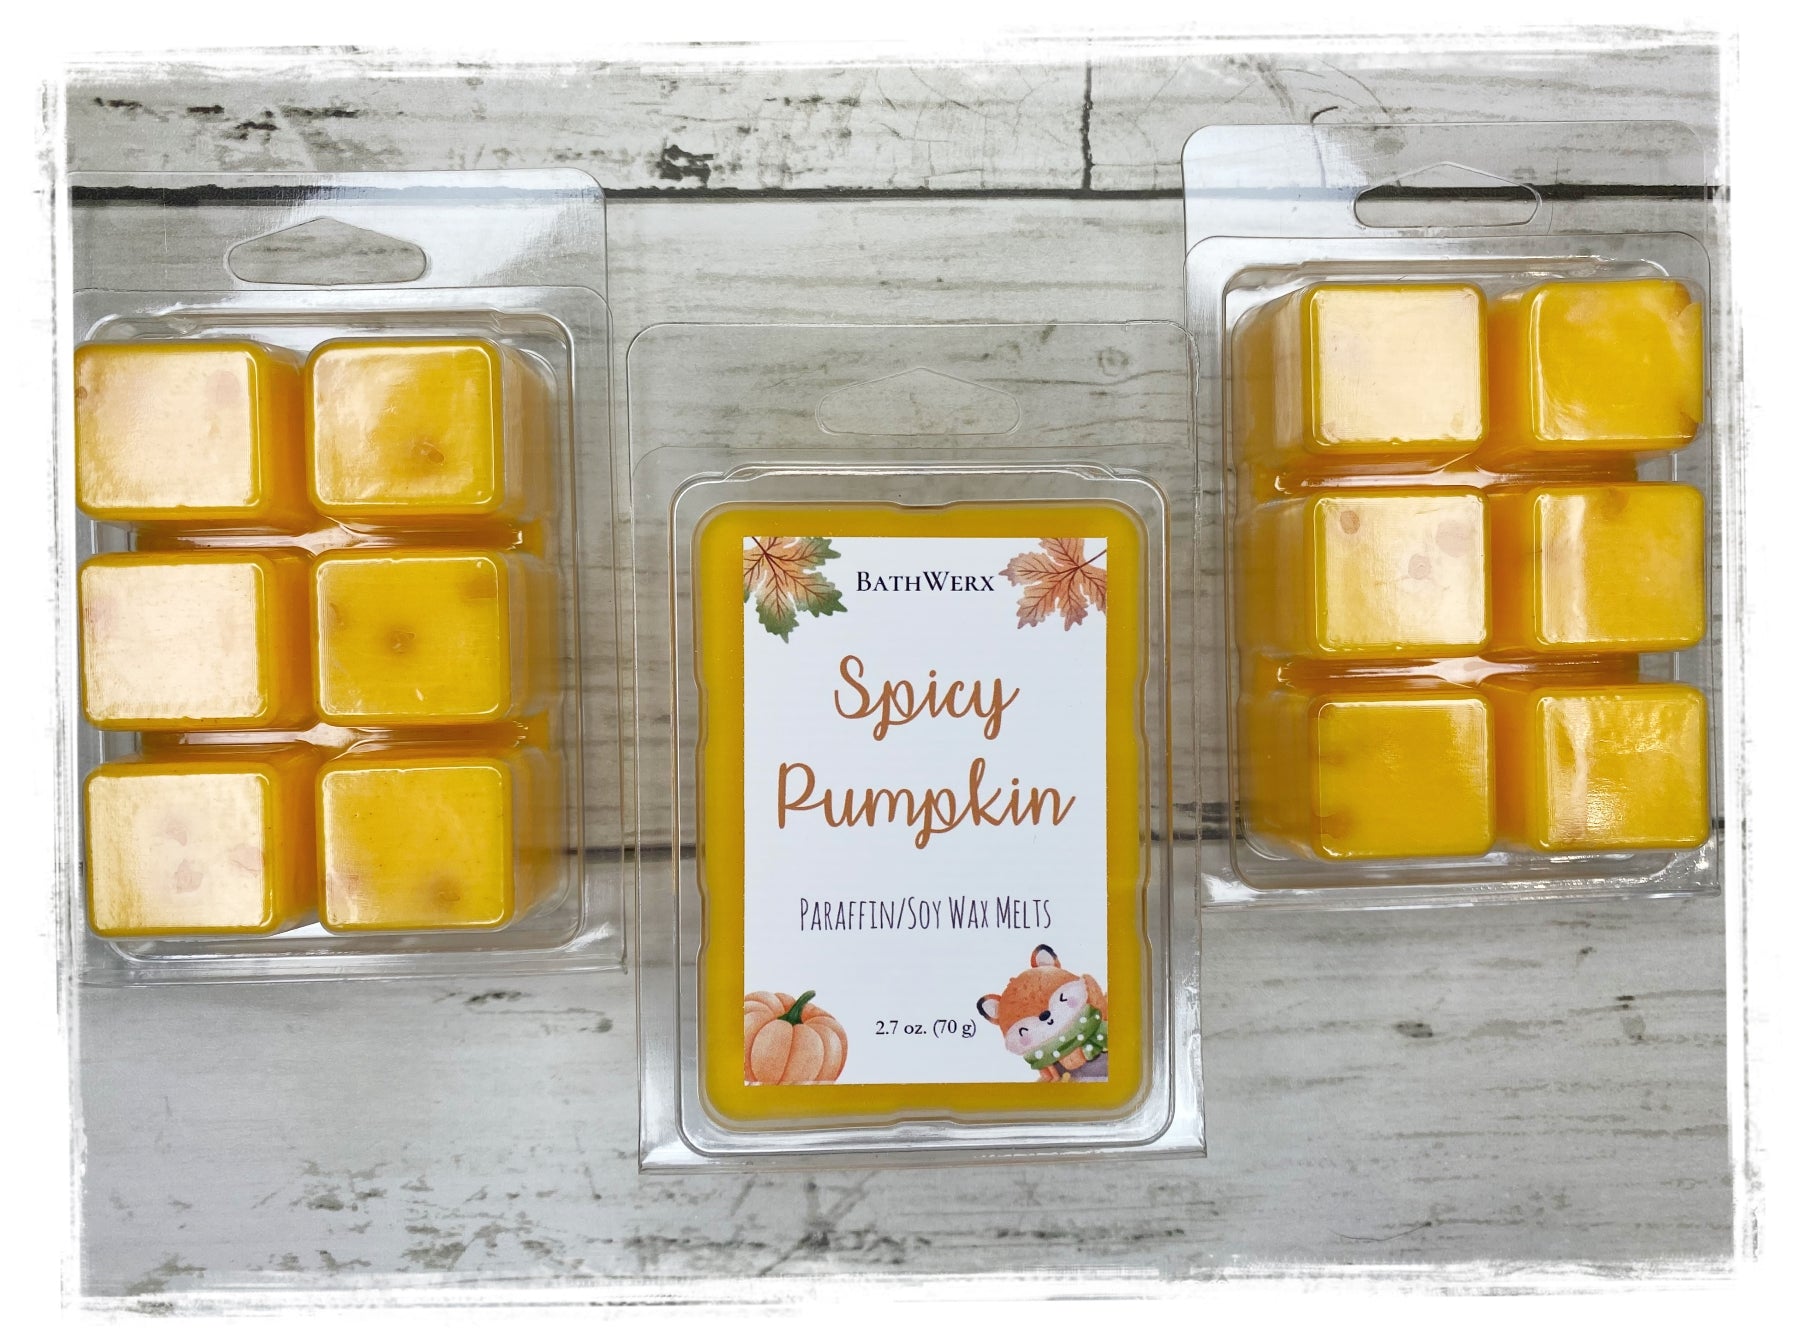 Fall Scented Wax Melts